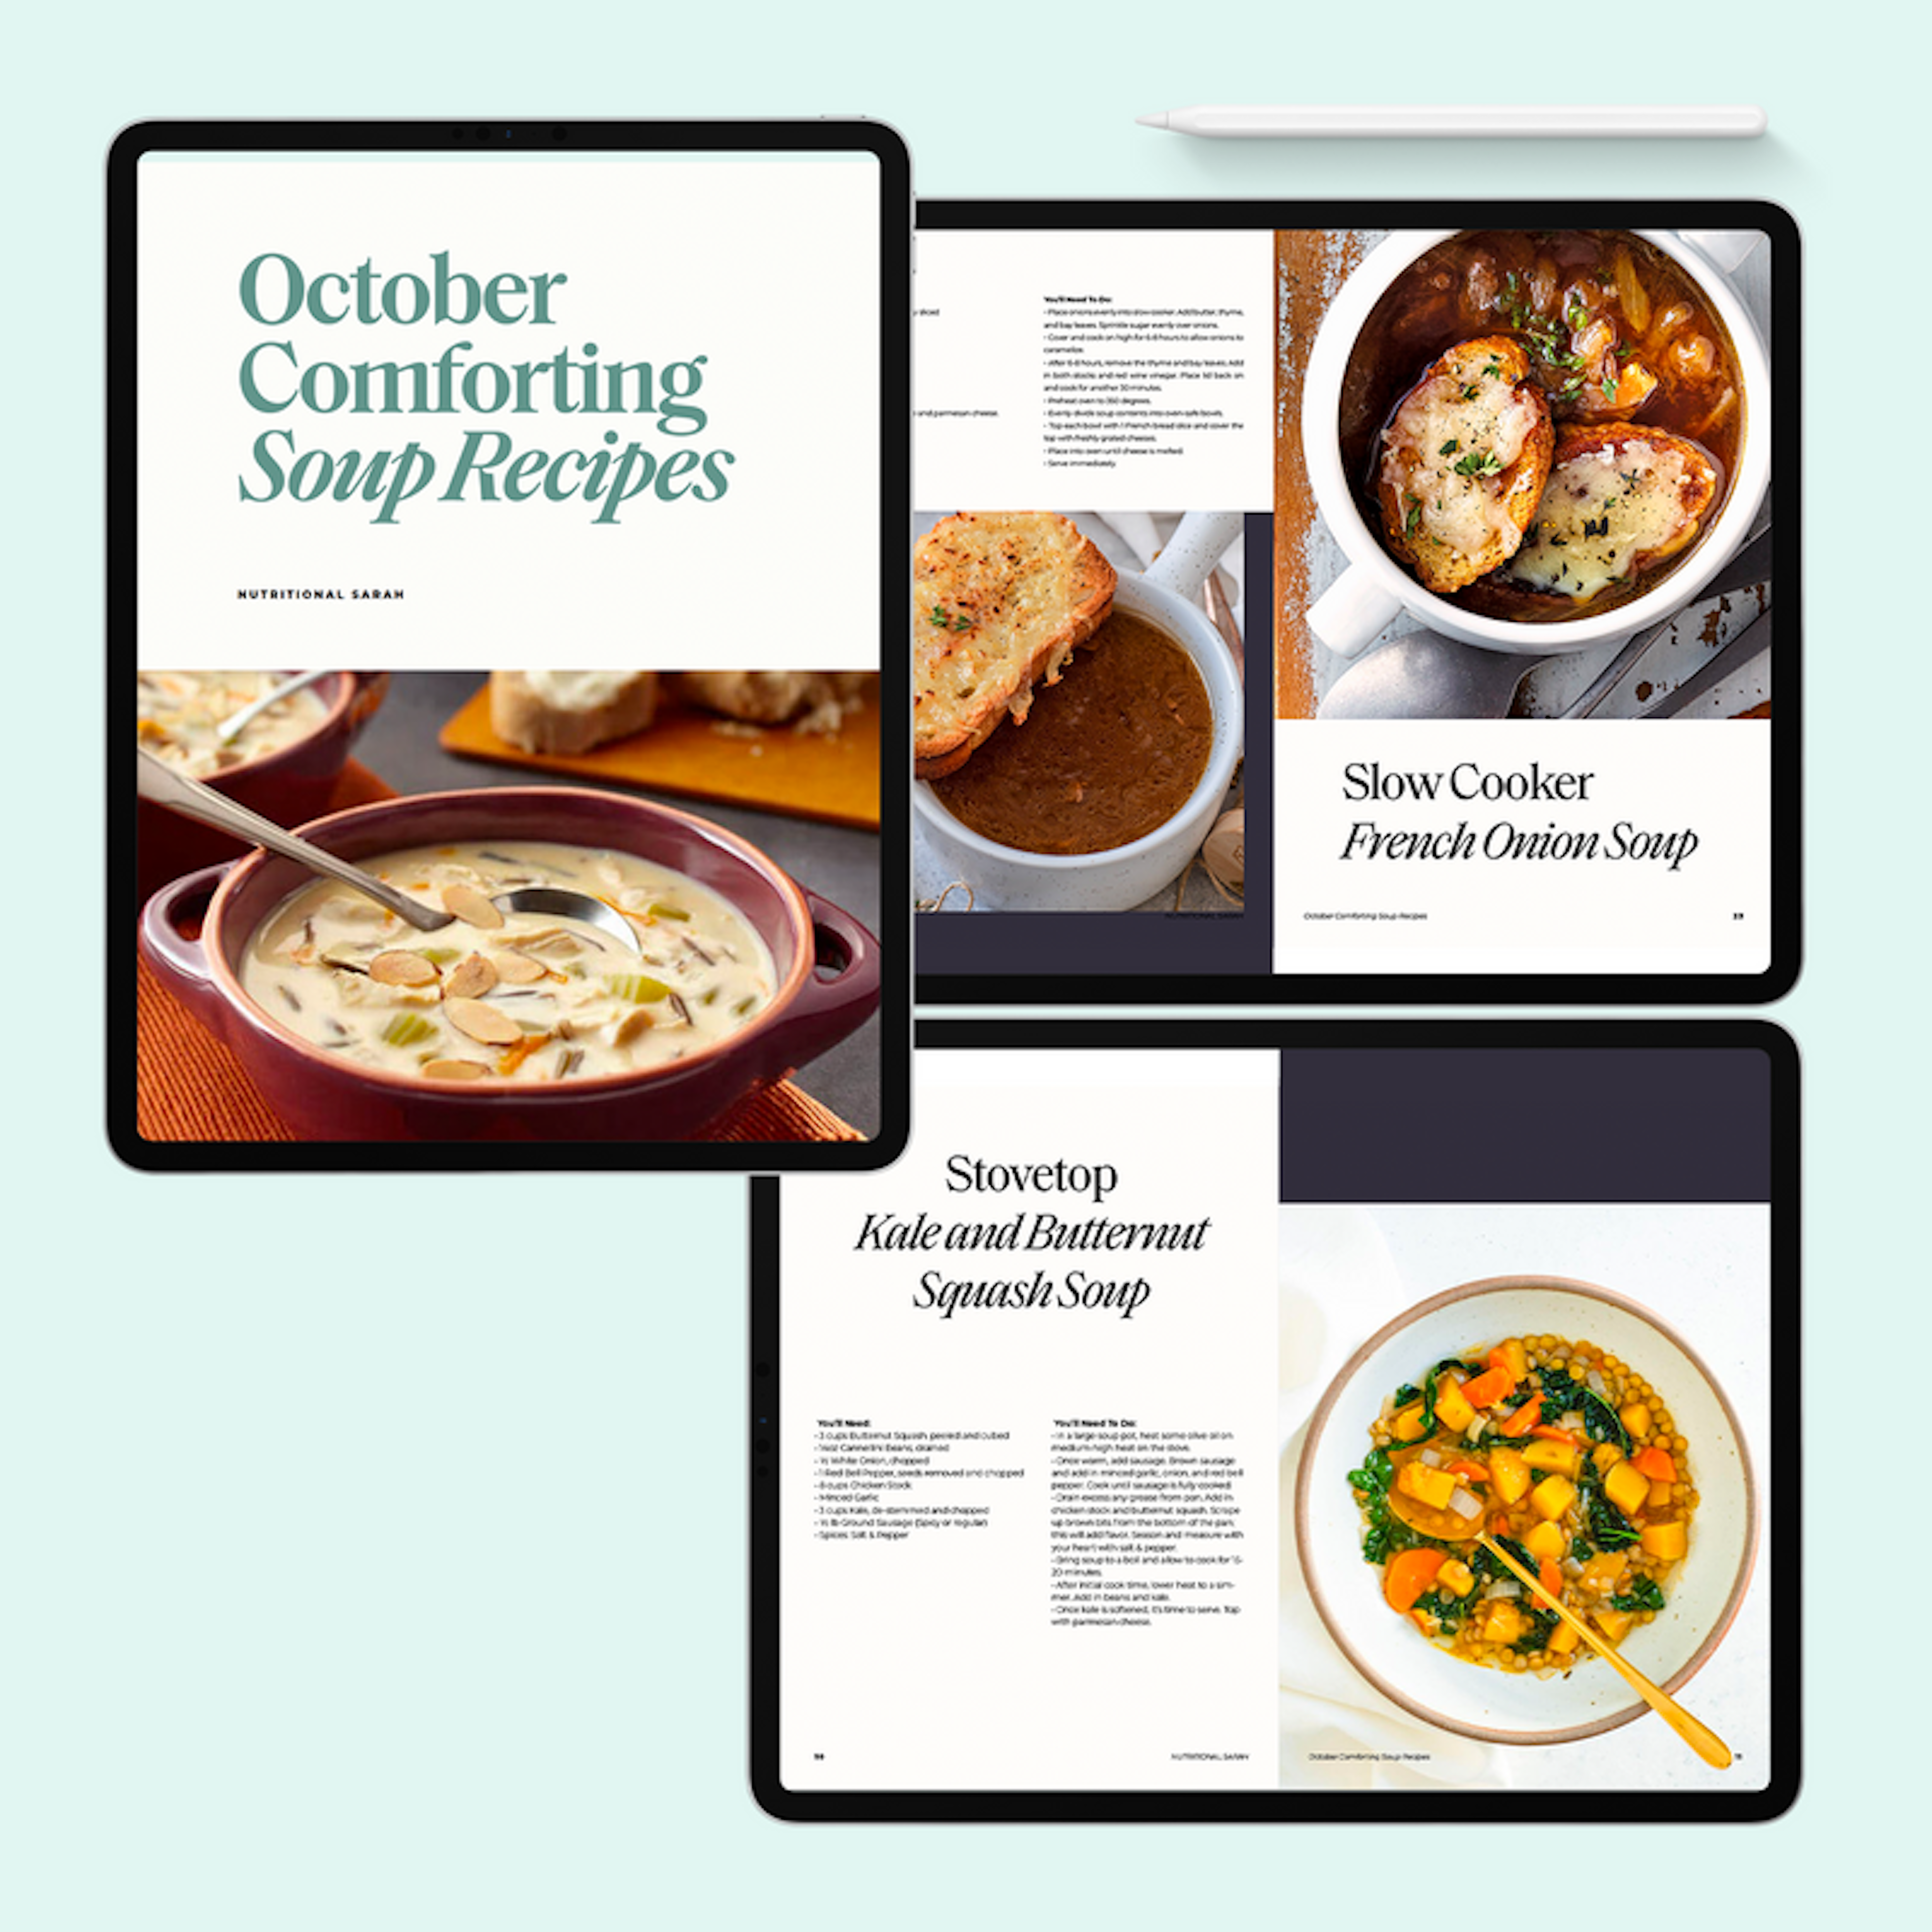 October Comforting Soup Recipes